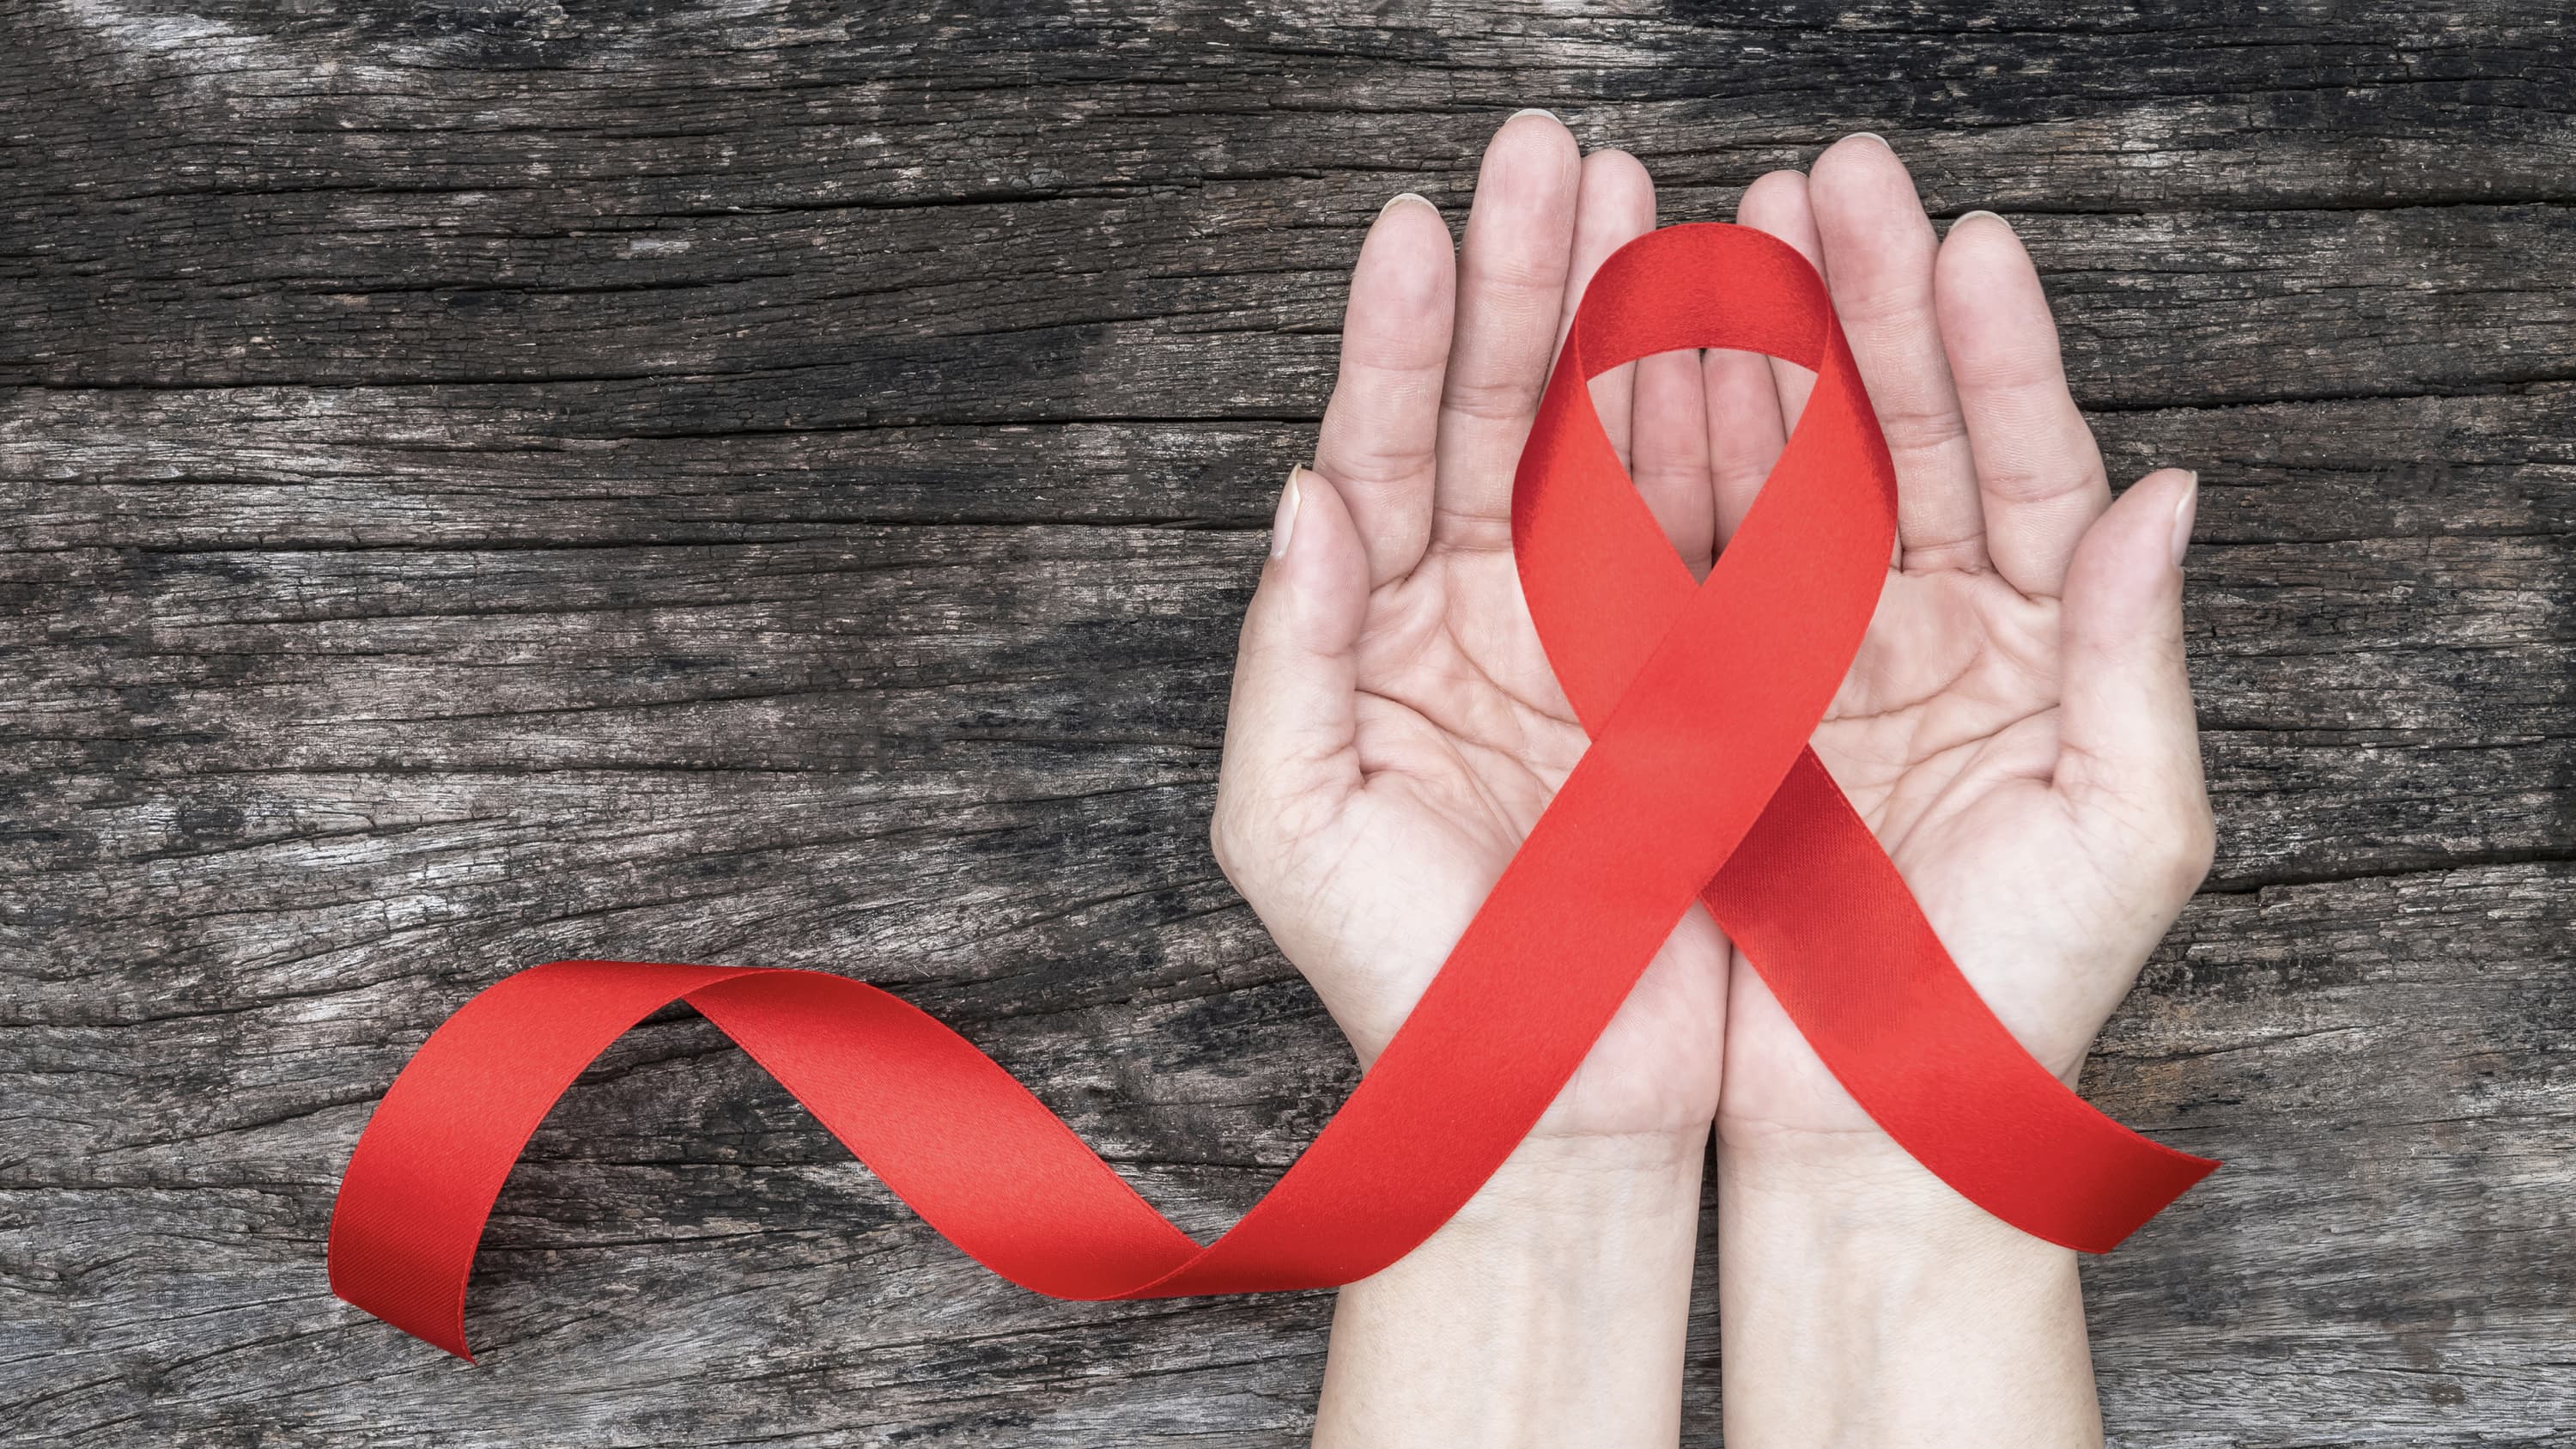 AIDS ribbon in an open hand